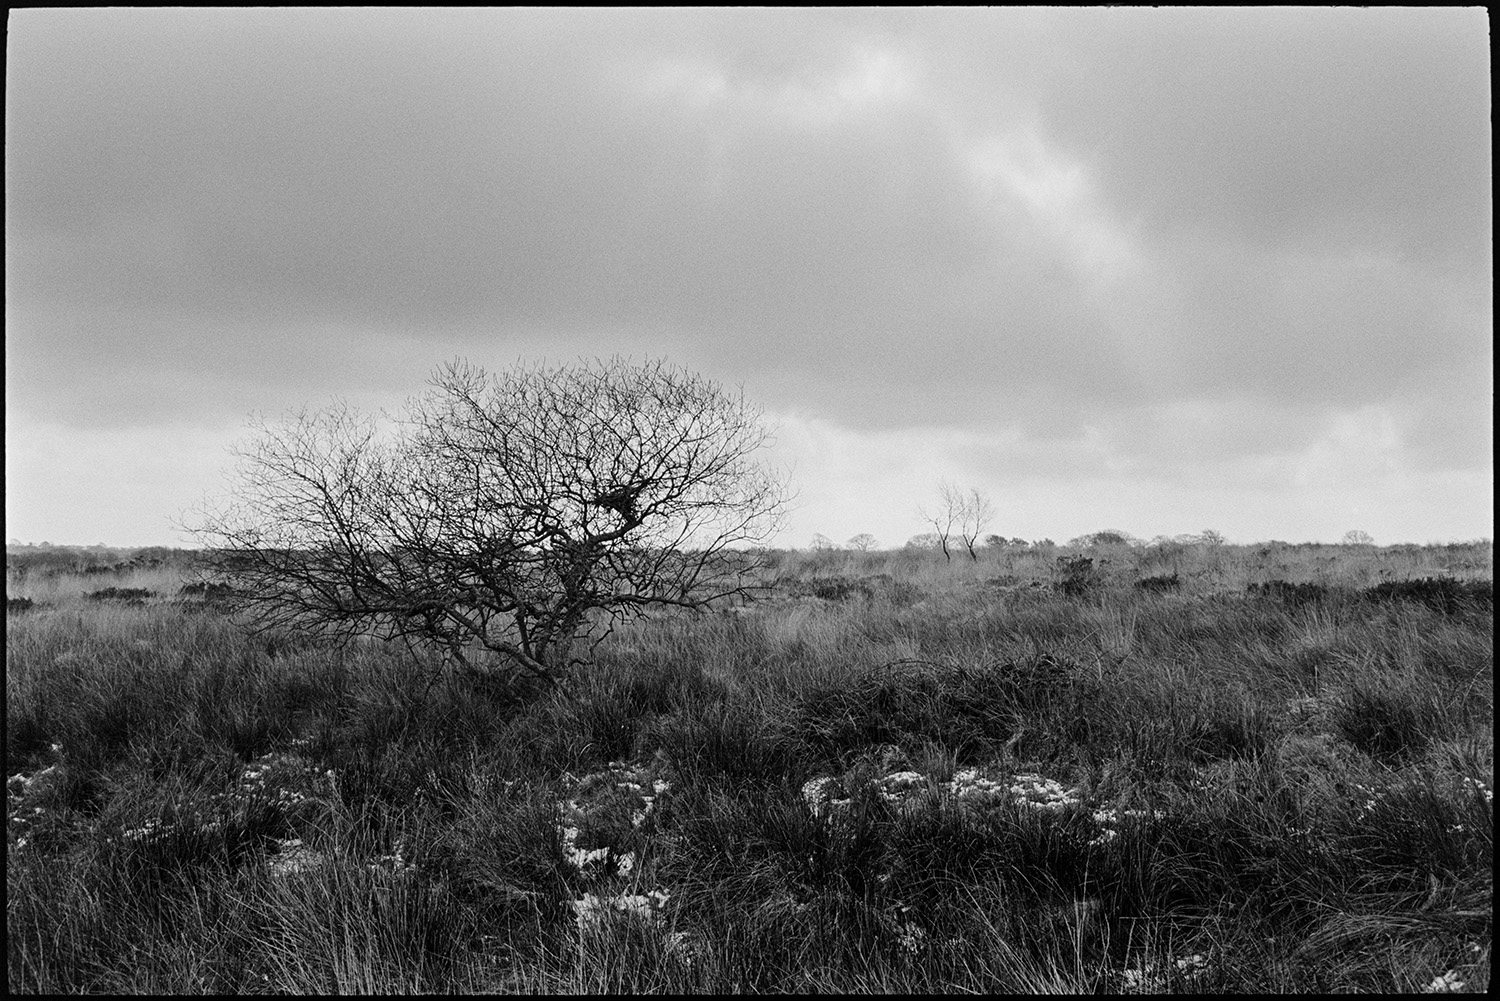 Small tree with birds nest on frosty moor. 
[A bird's nest in a small tree on Hollocombe Moor. Small patches of snow can be seen in the moor.]